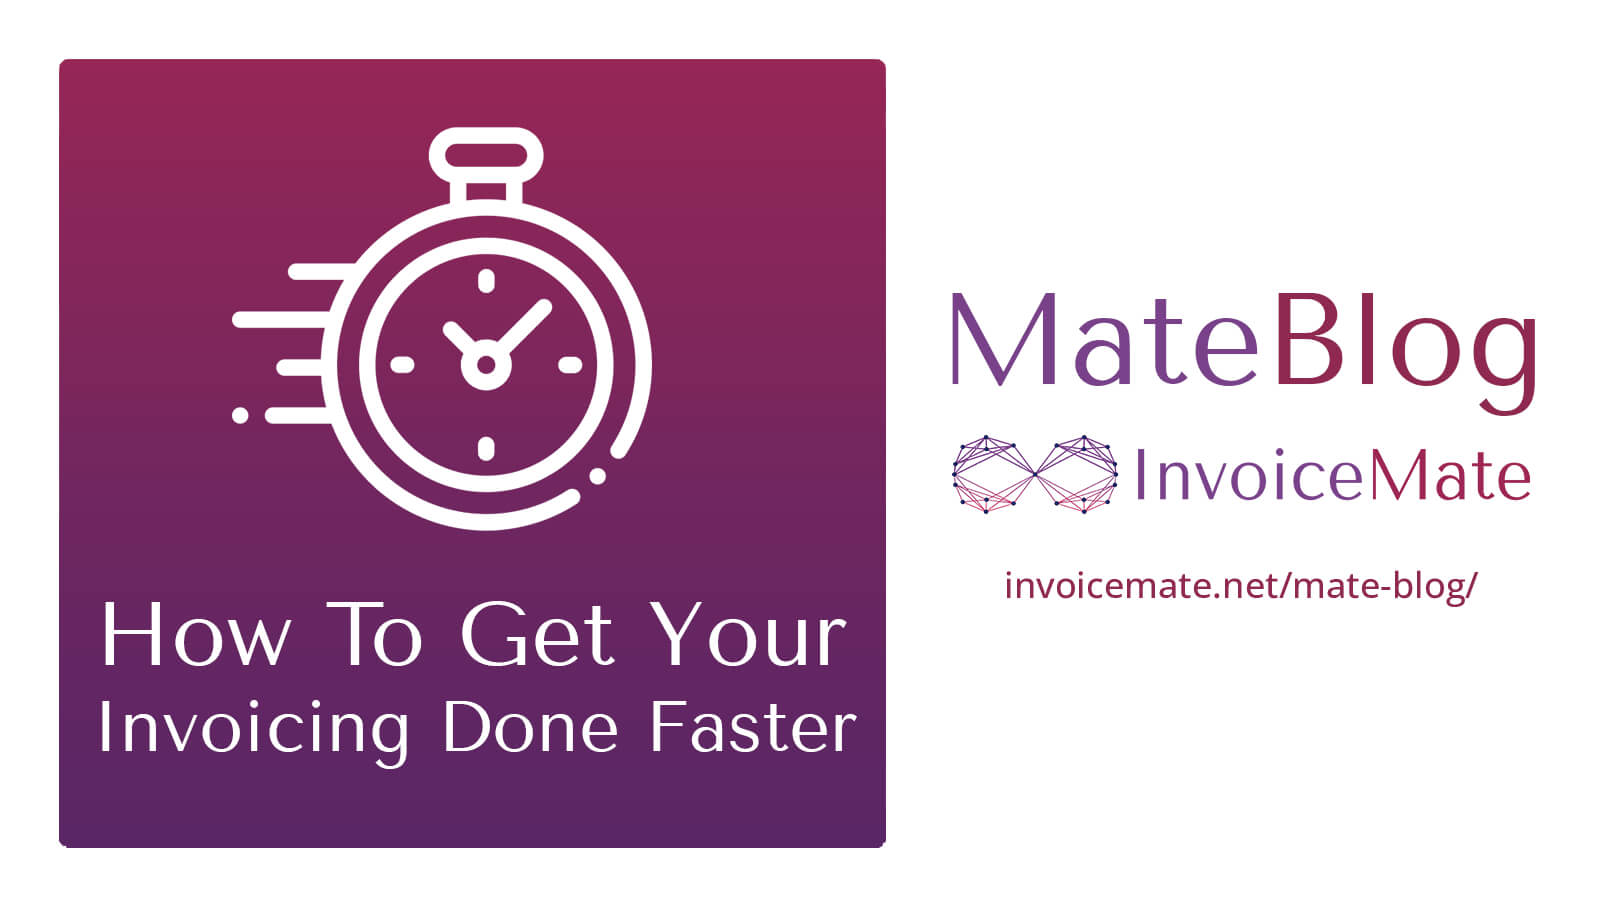 How To Get Your Invoicing Done Faster